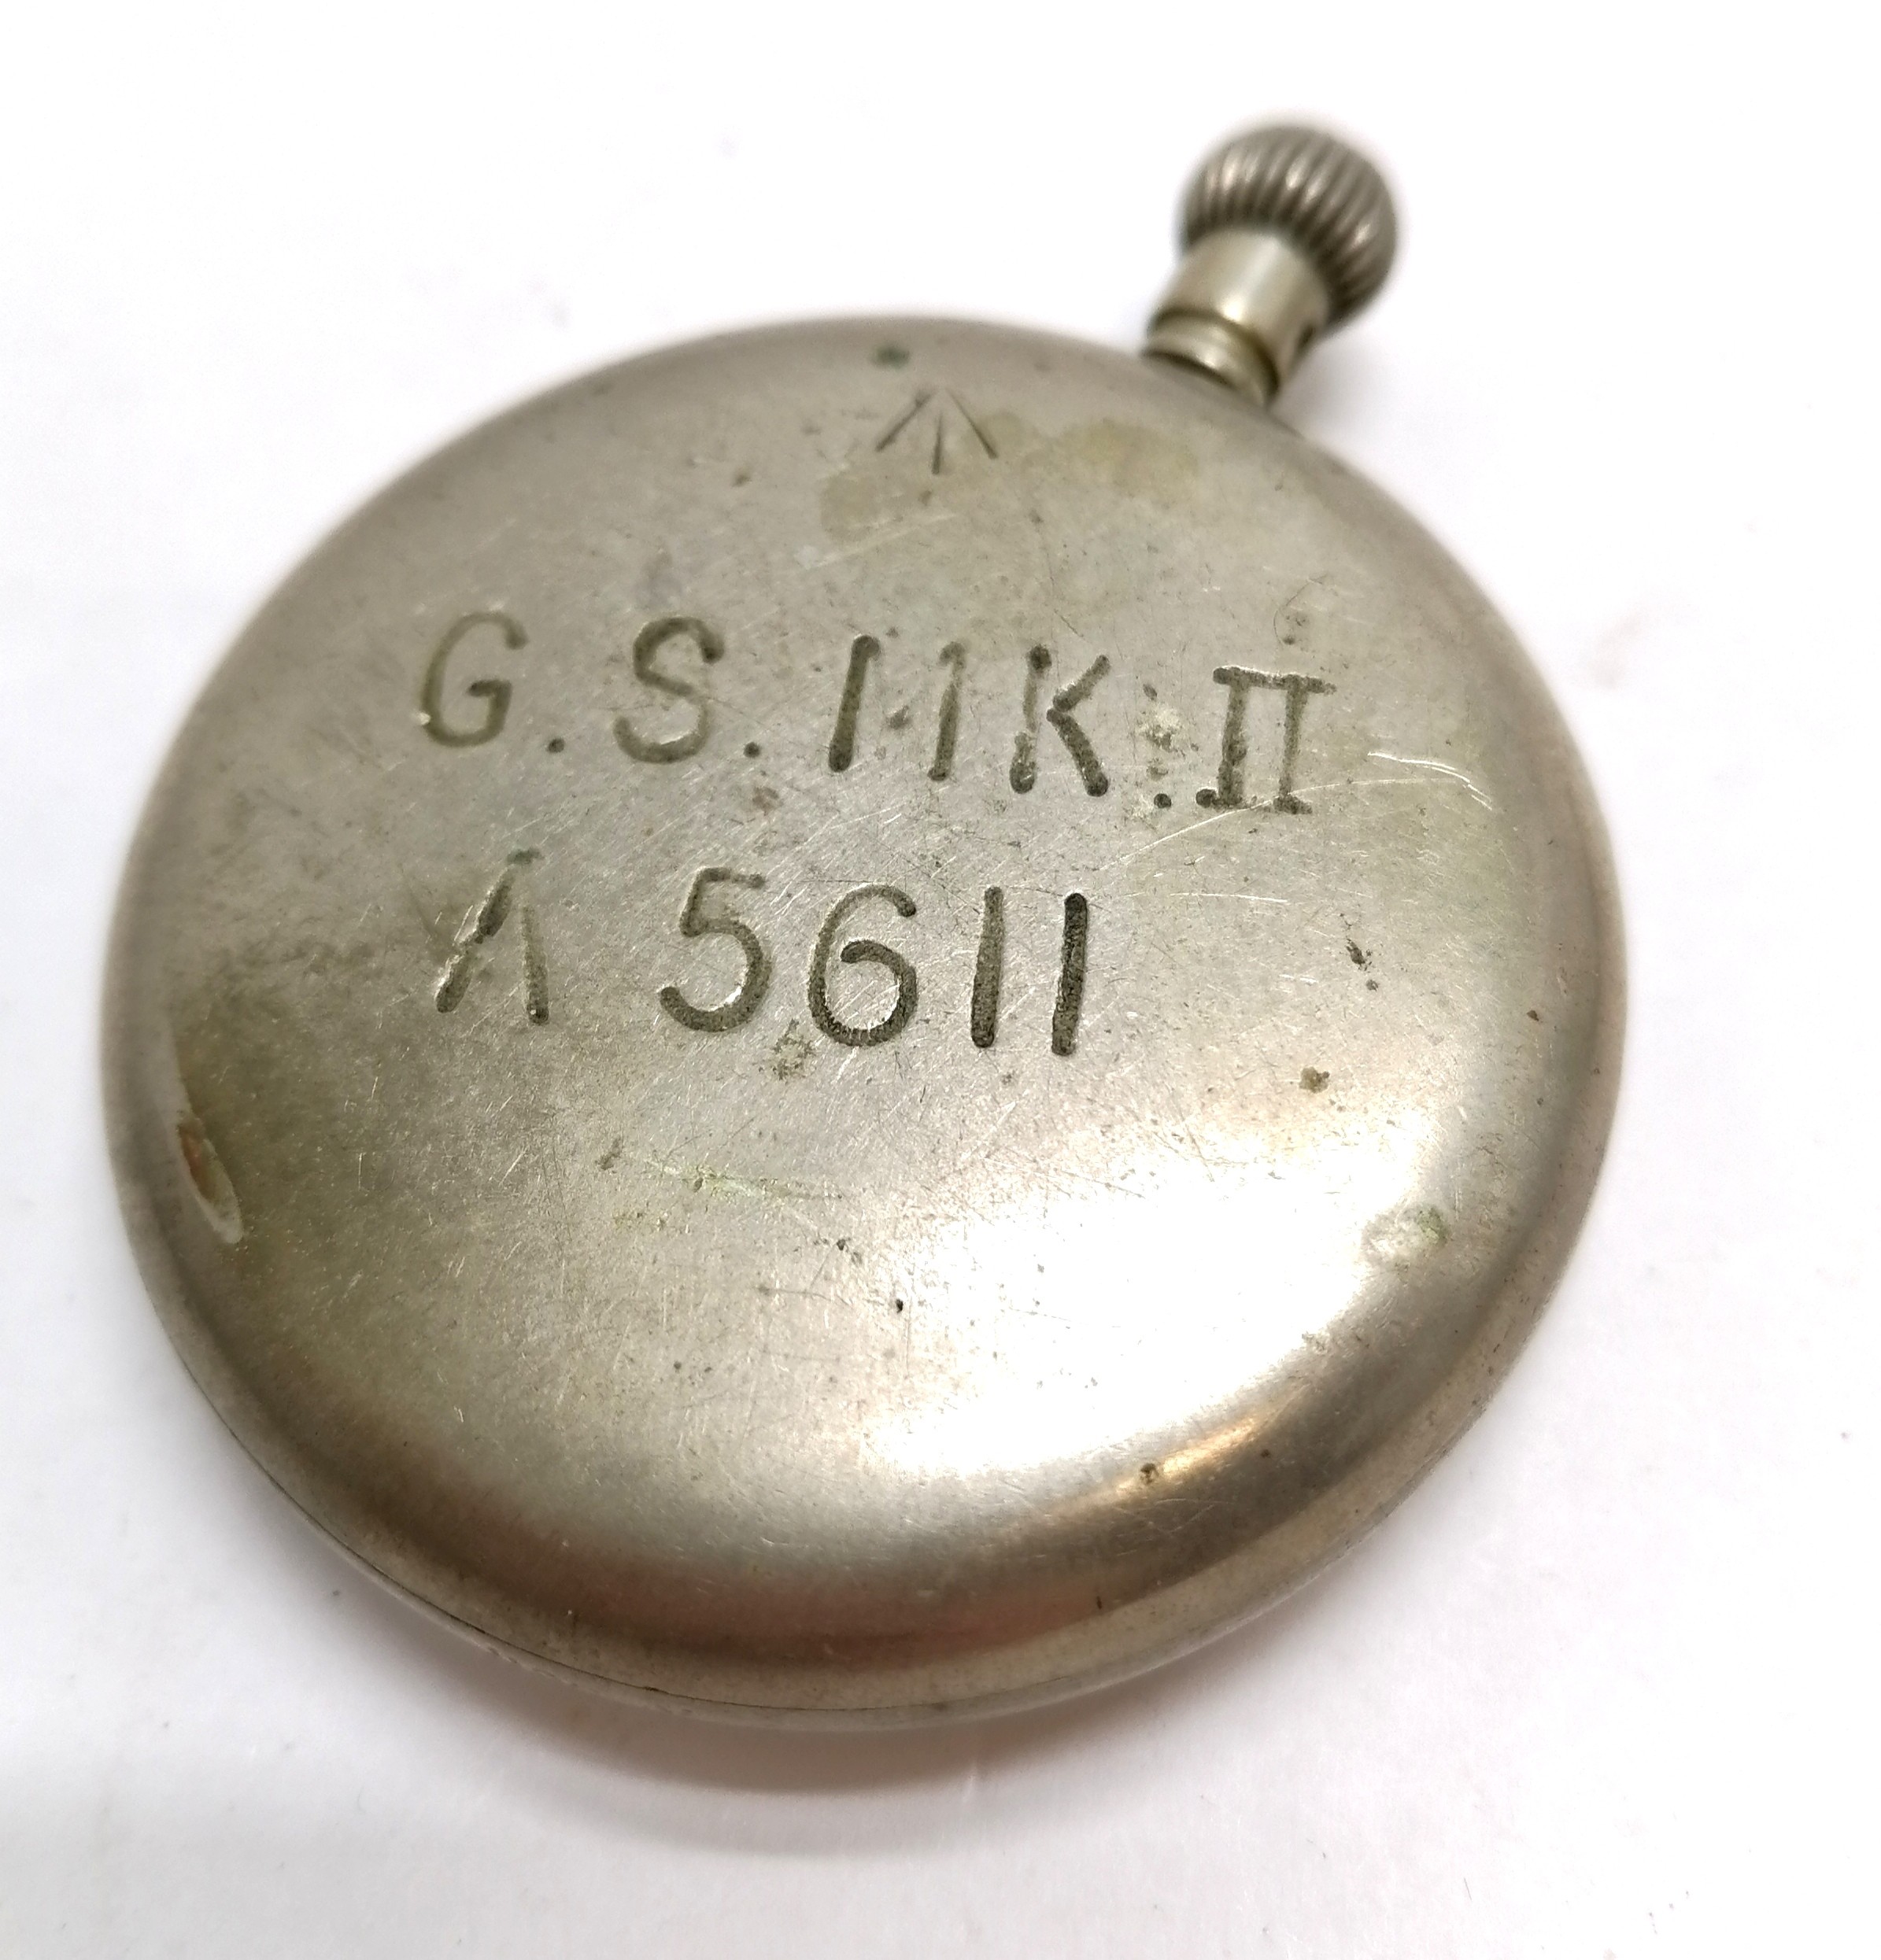 Air Ministry GS MK II pocket watch by Carley & Clemence t/w Air Ministry AM 6B/221 stop watch ~ both - Image 3 of 3